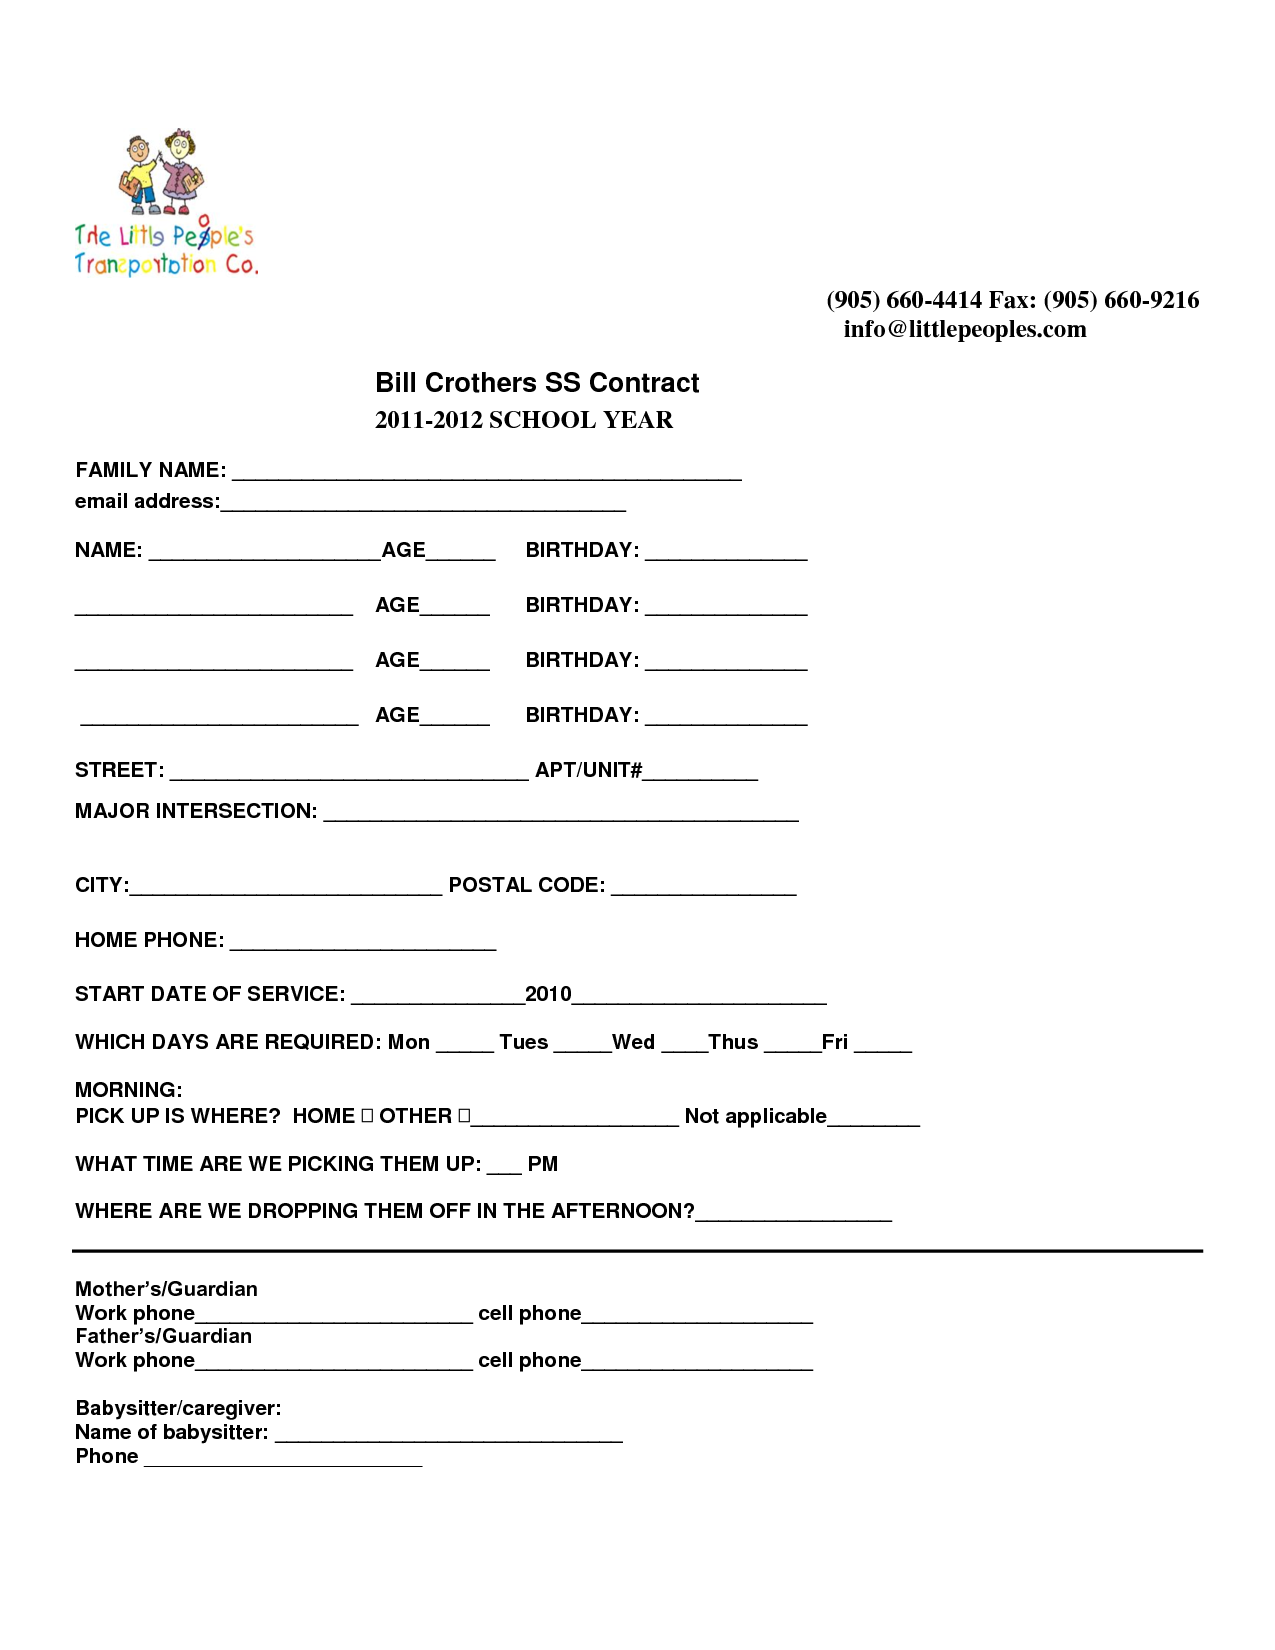 Babysitting Contract Free Printable Documents